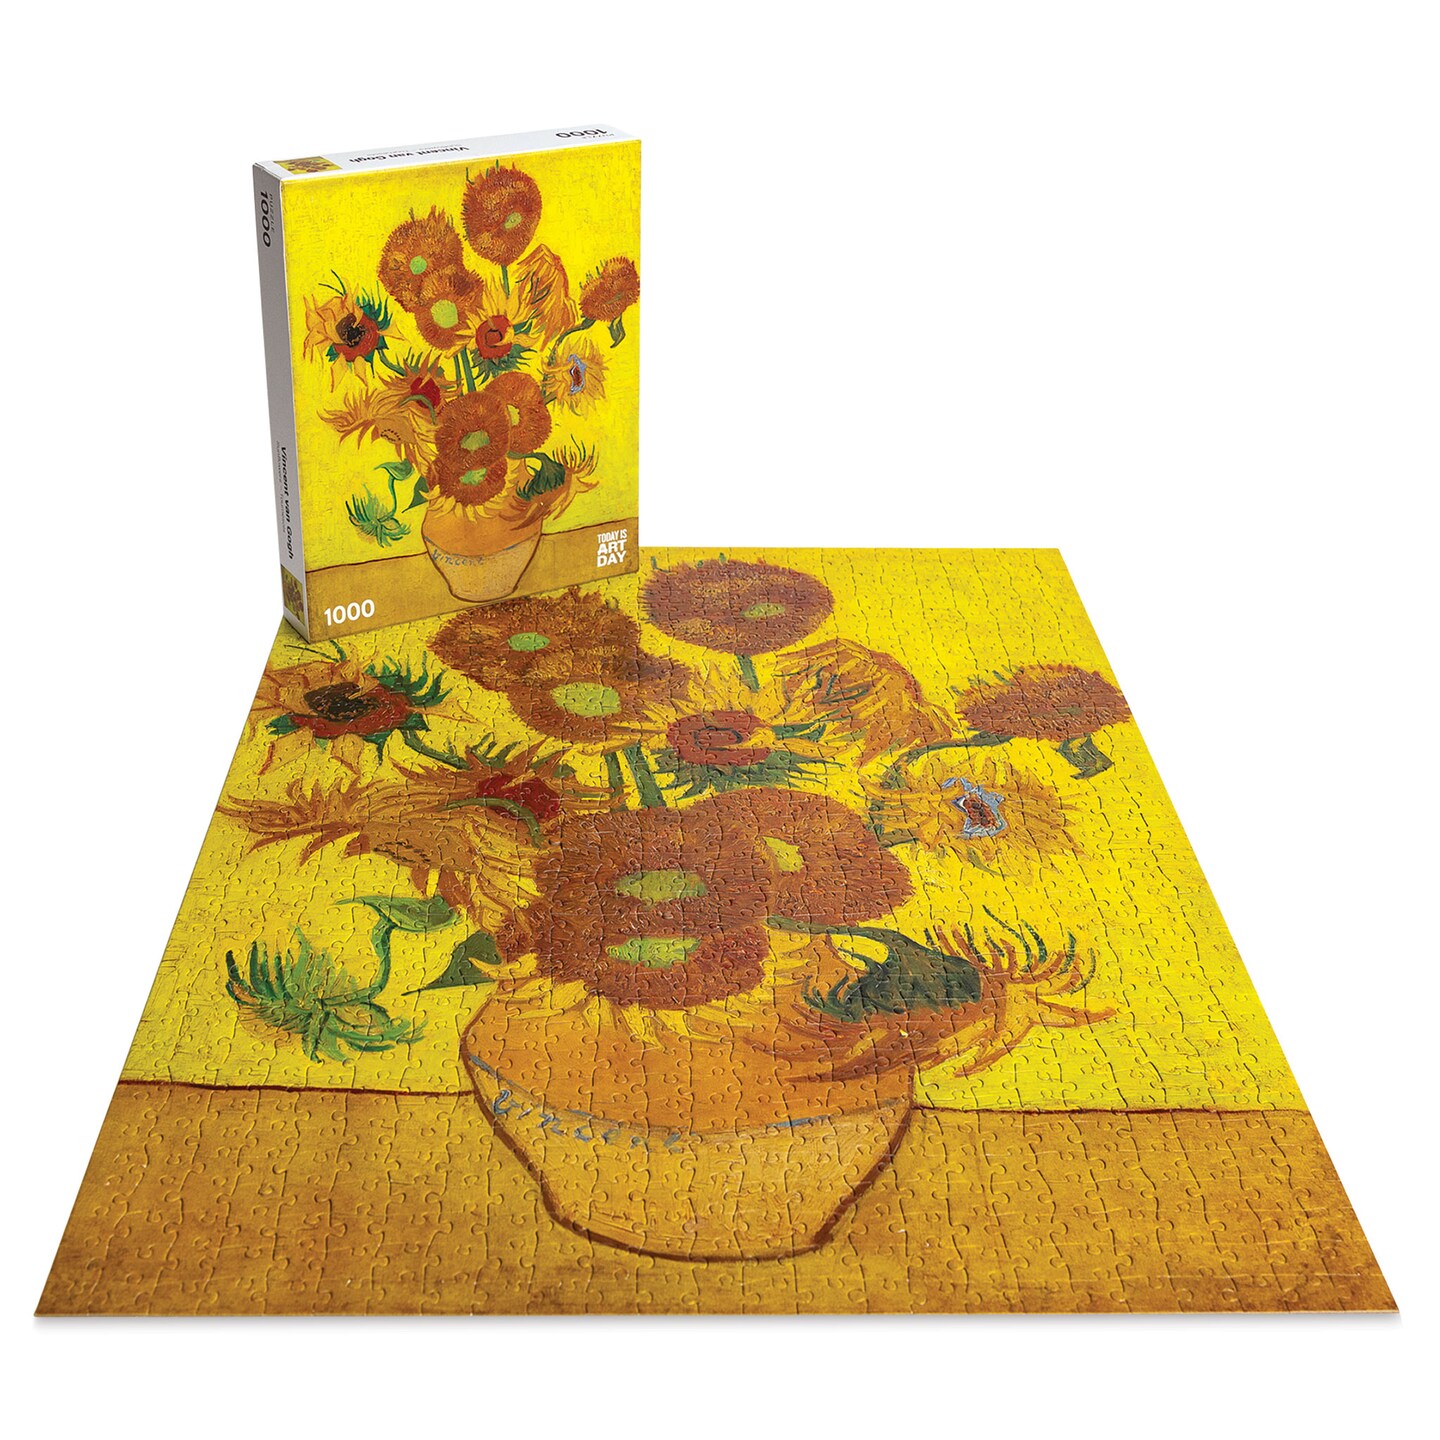 Today is Art Day Famous Paintings Puzzle - Sunflowers, 1000 pieces